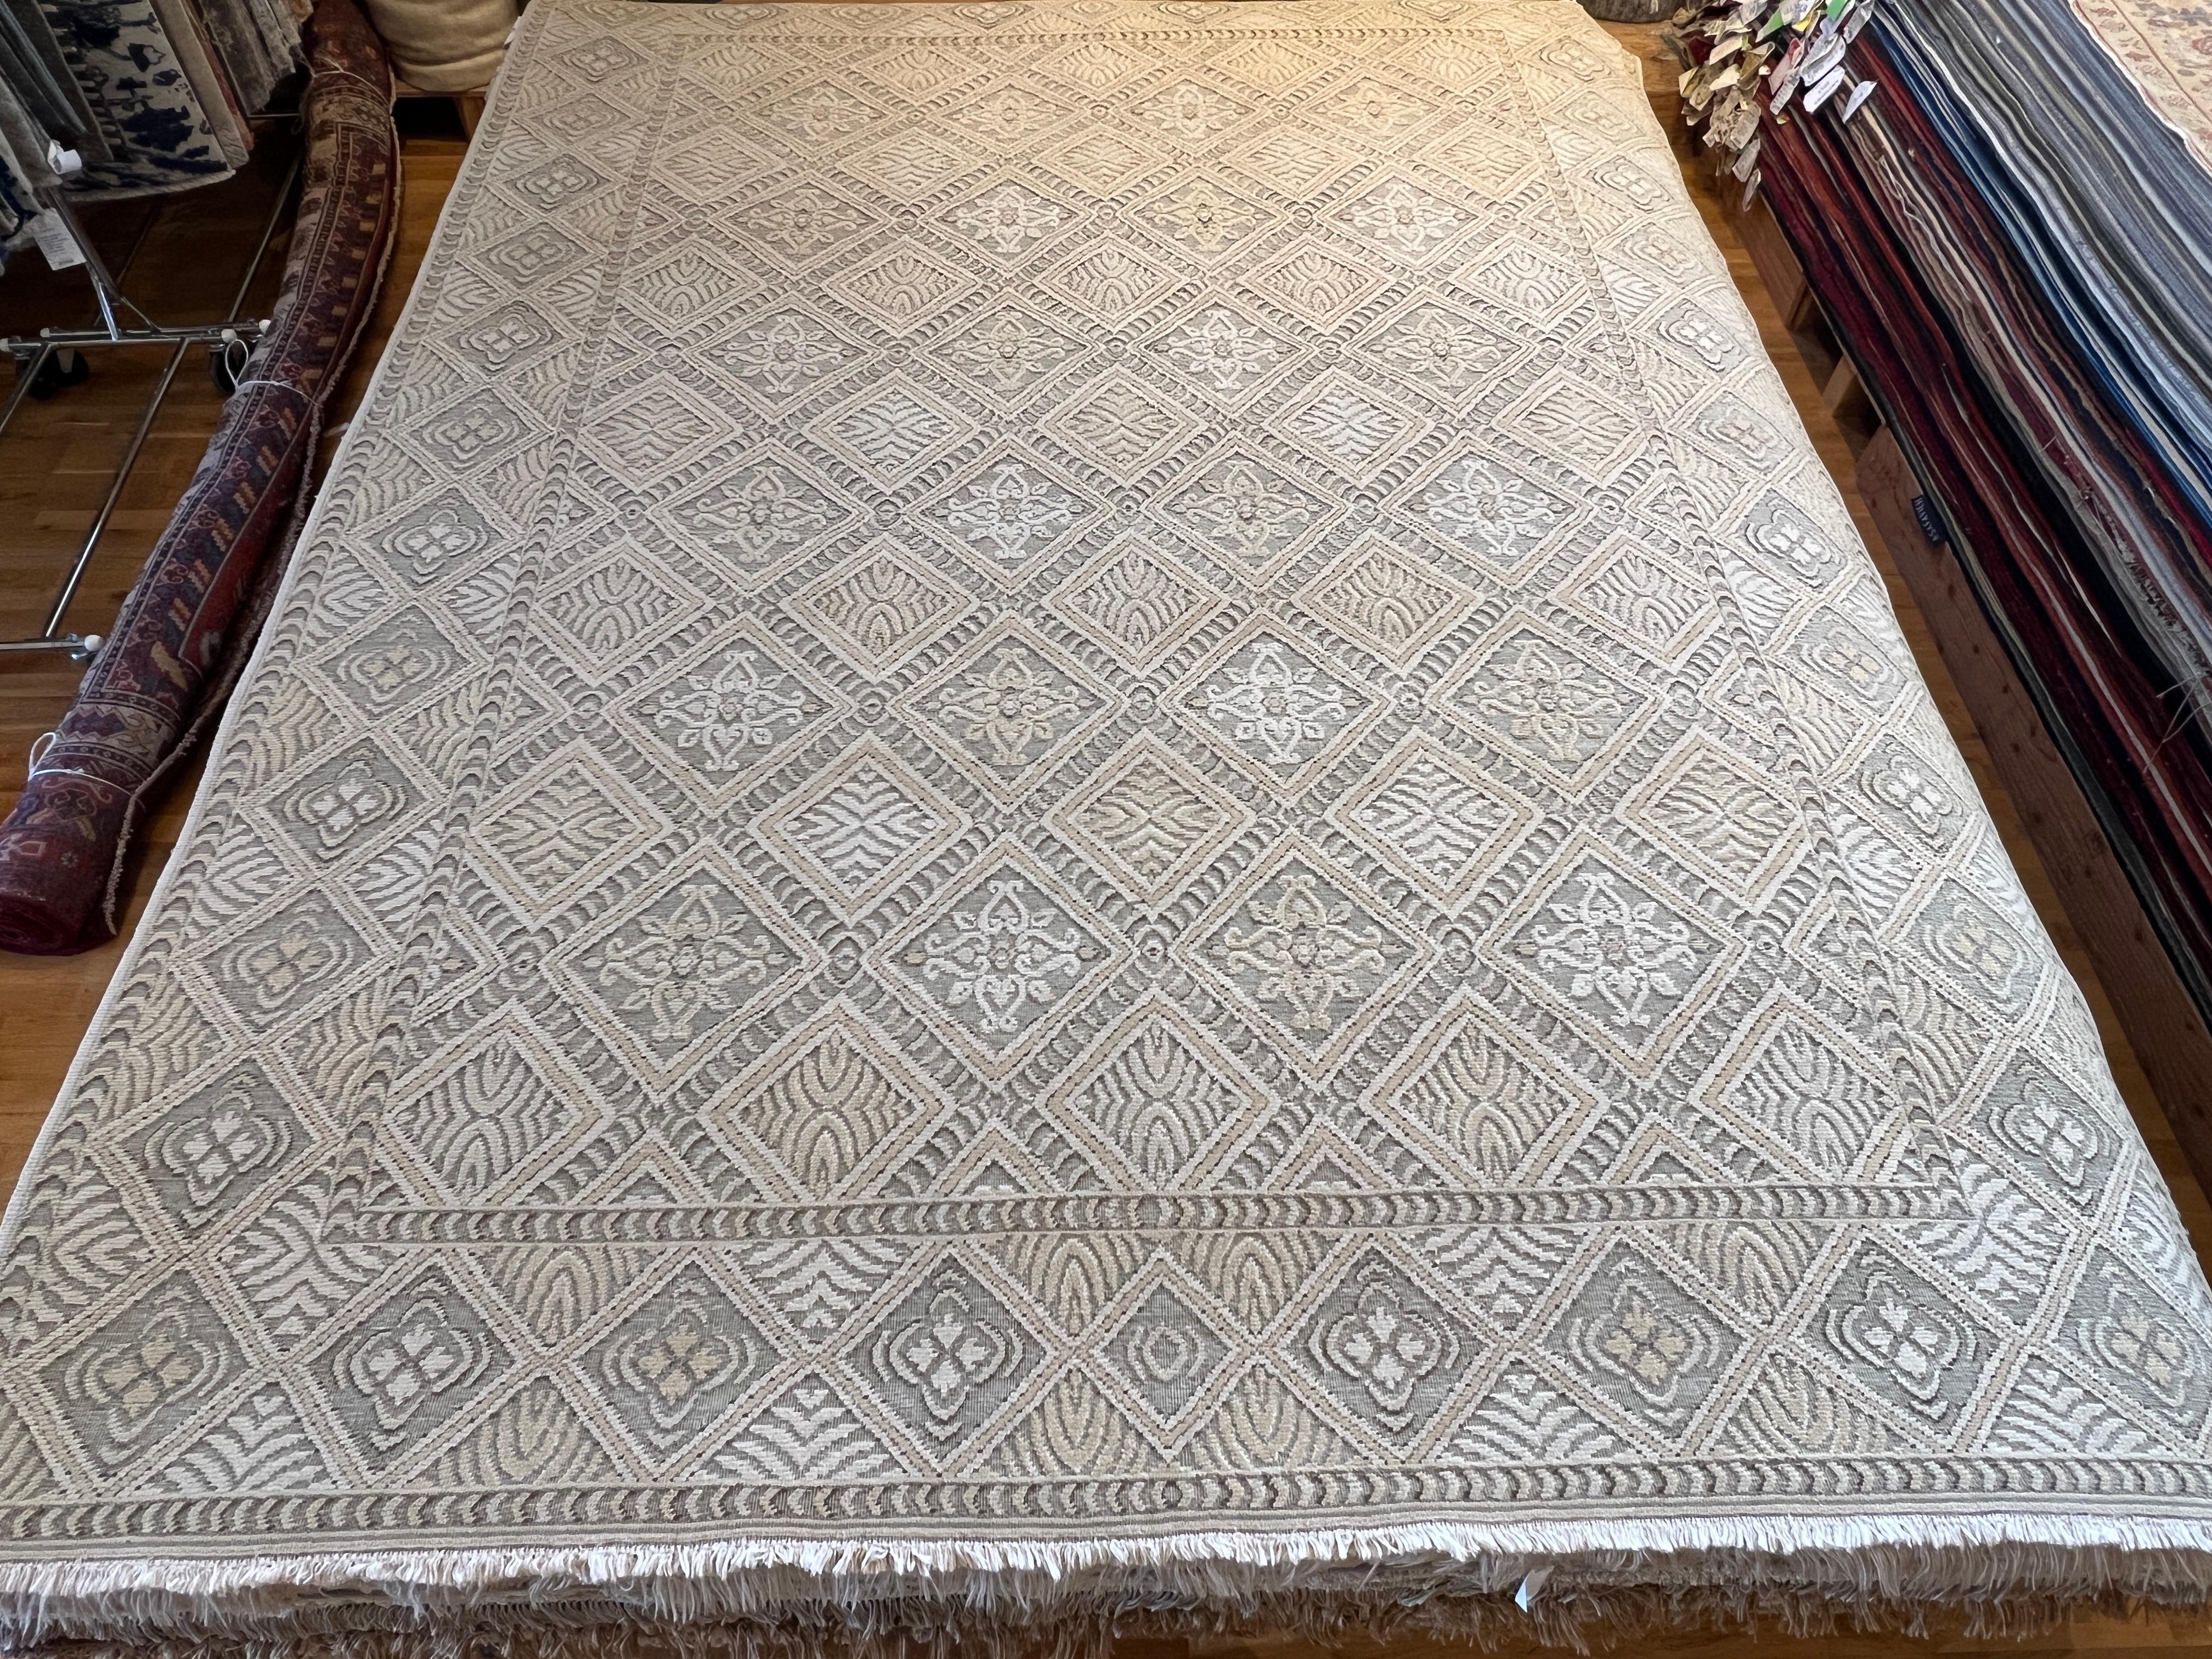 Discover our exquisite Hand-Knotted Wool Rug, blending timeless French floral design with modern sophistication. Meticulously crafted by skilled artisans, each rug features a delicate geometric pattern in neutral tones, hand-knotted from premium